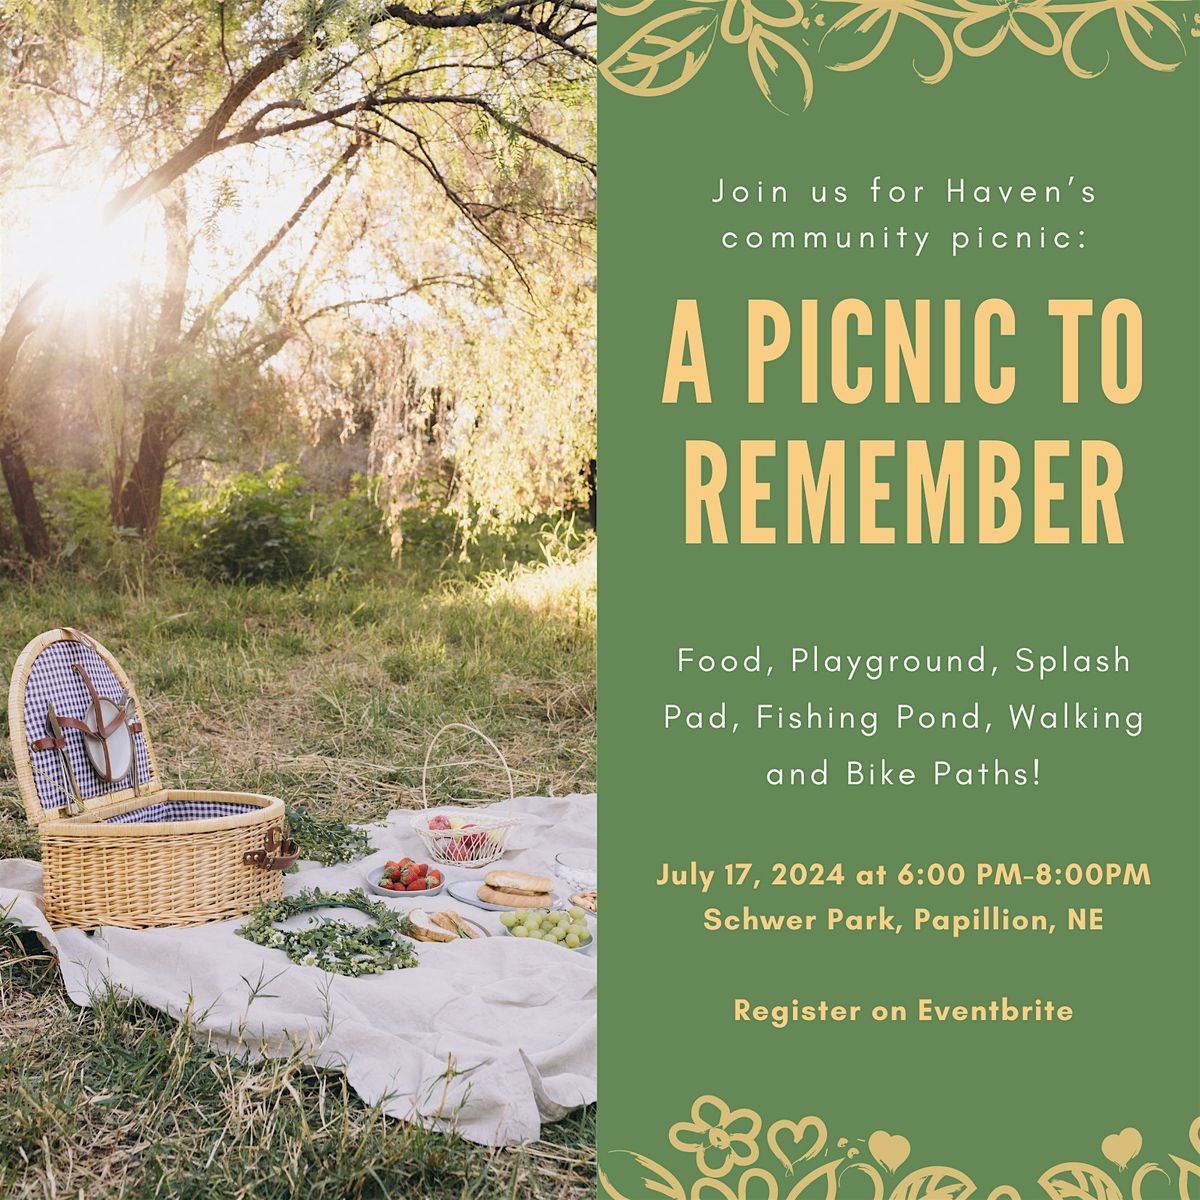 A Picnic to Remember: A Haven Community Picnic